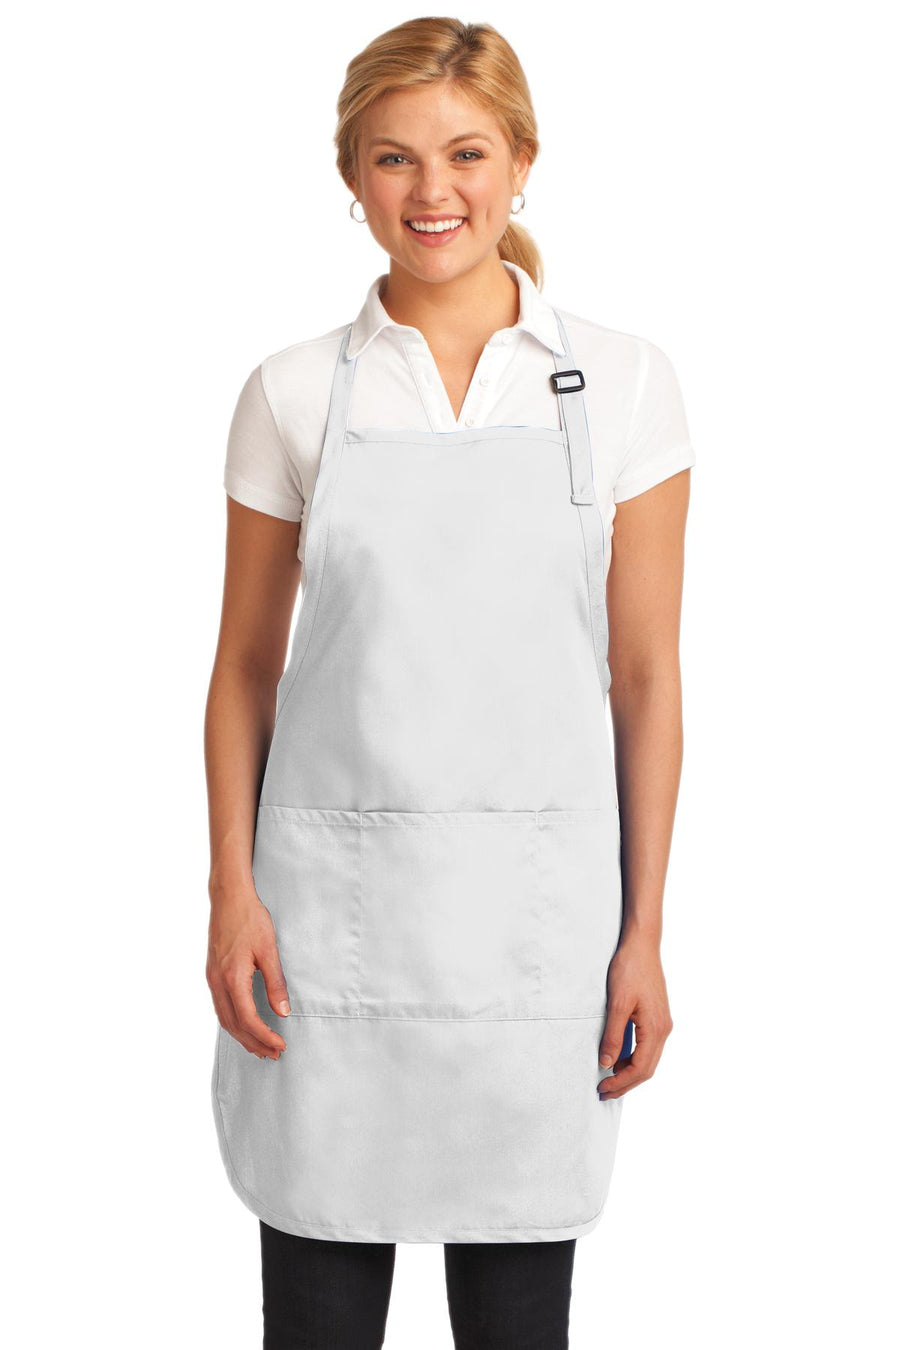 Port Authority Easy Care Full-Length Apron with Stain Release.